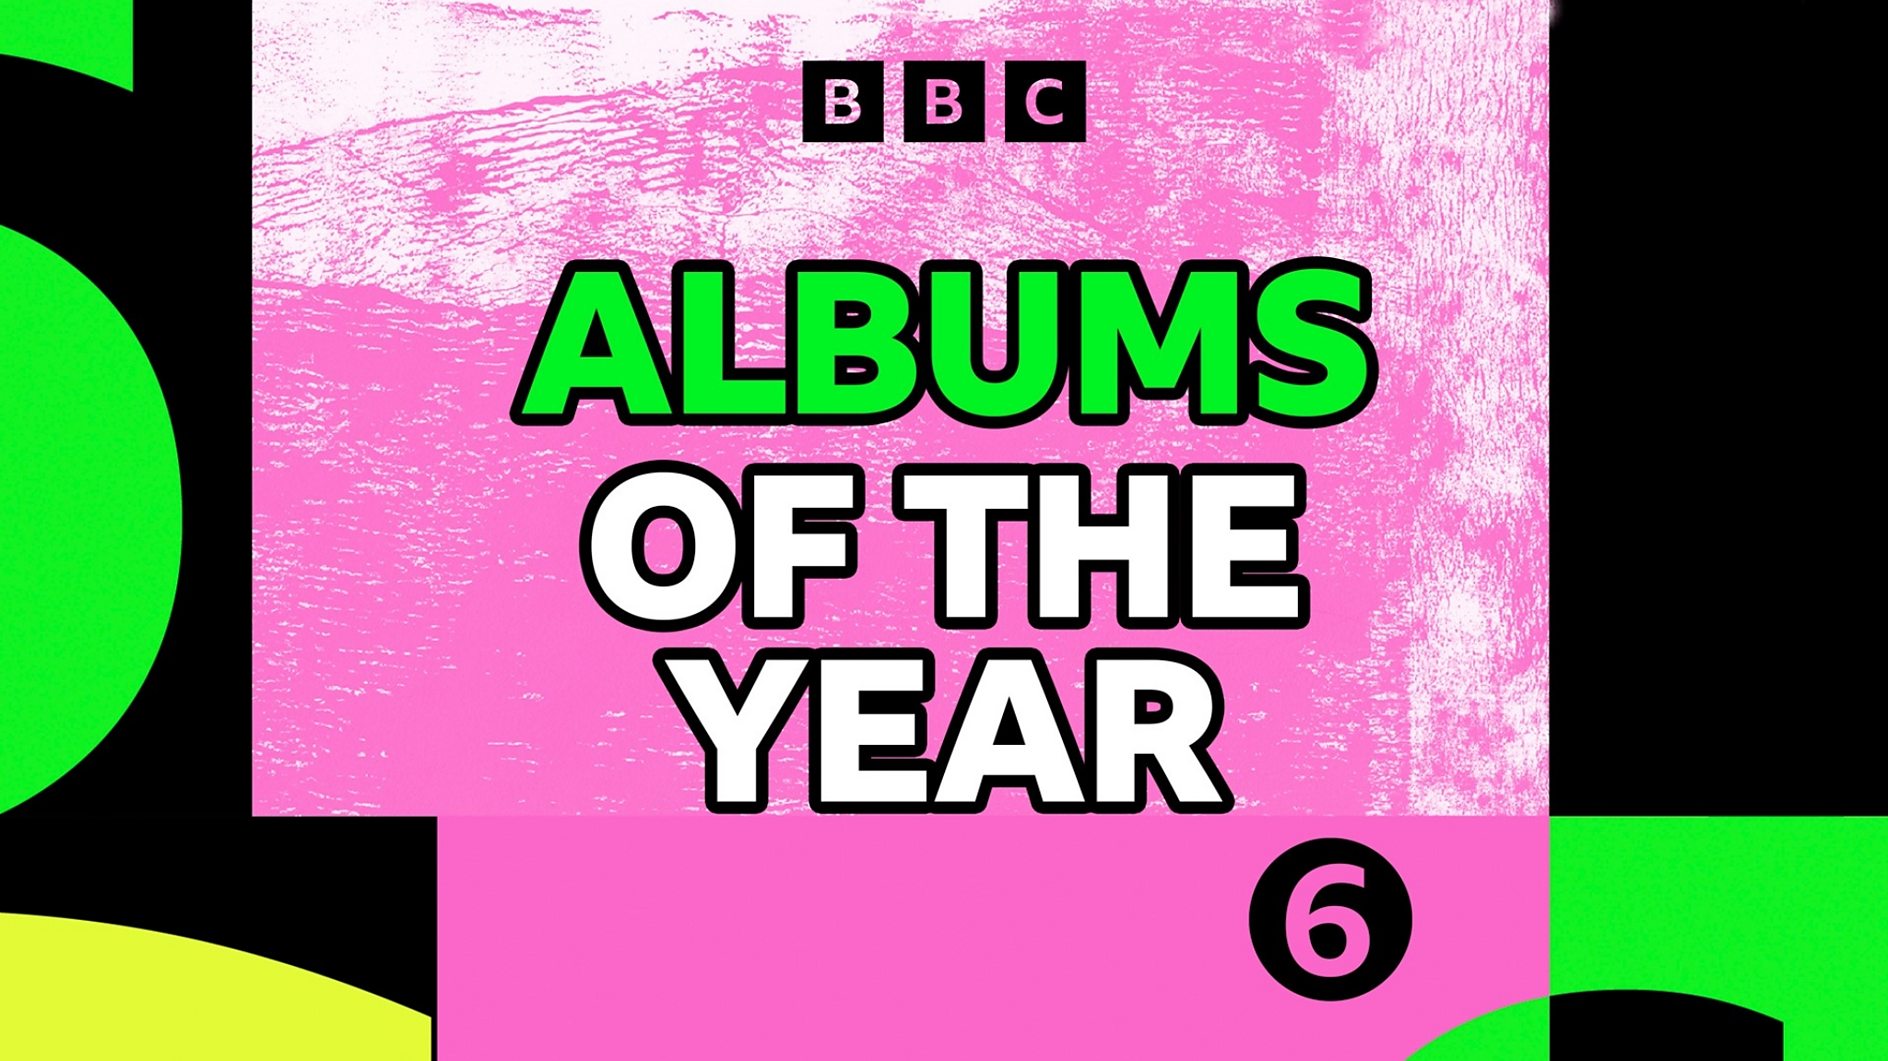 BBC Radio 6 Music announces its Albums of the Year